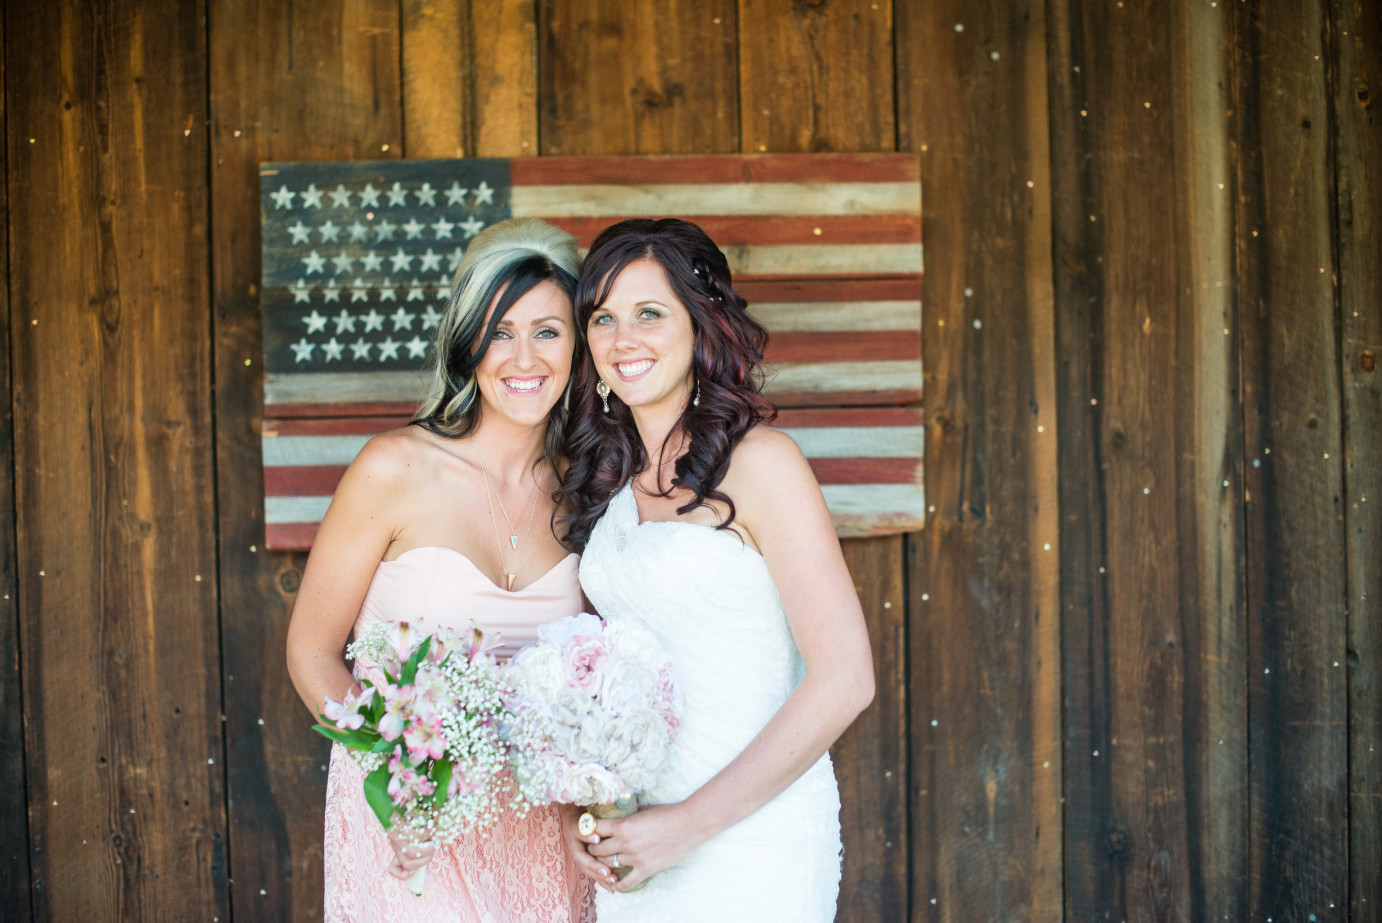 Choosing Your Maid of Honor Bride with maid of honor photo